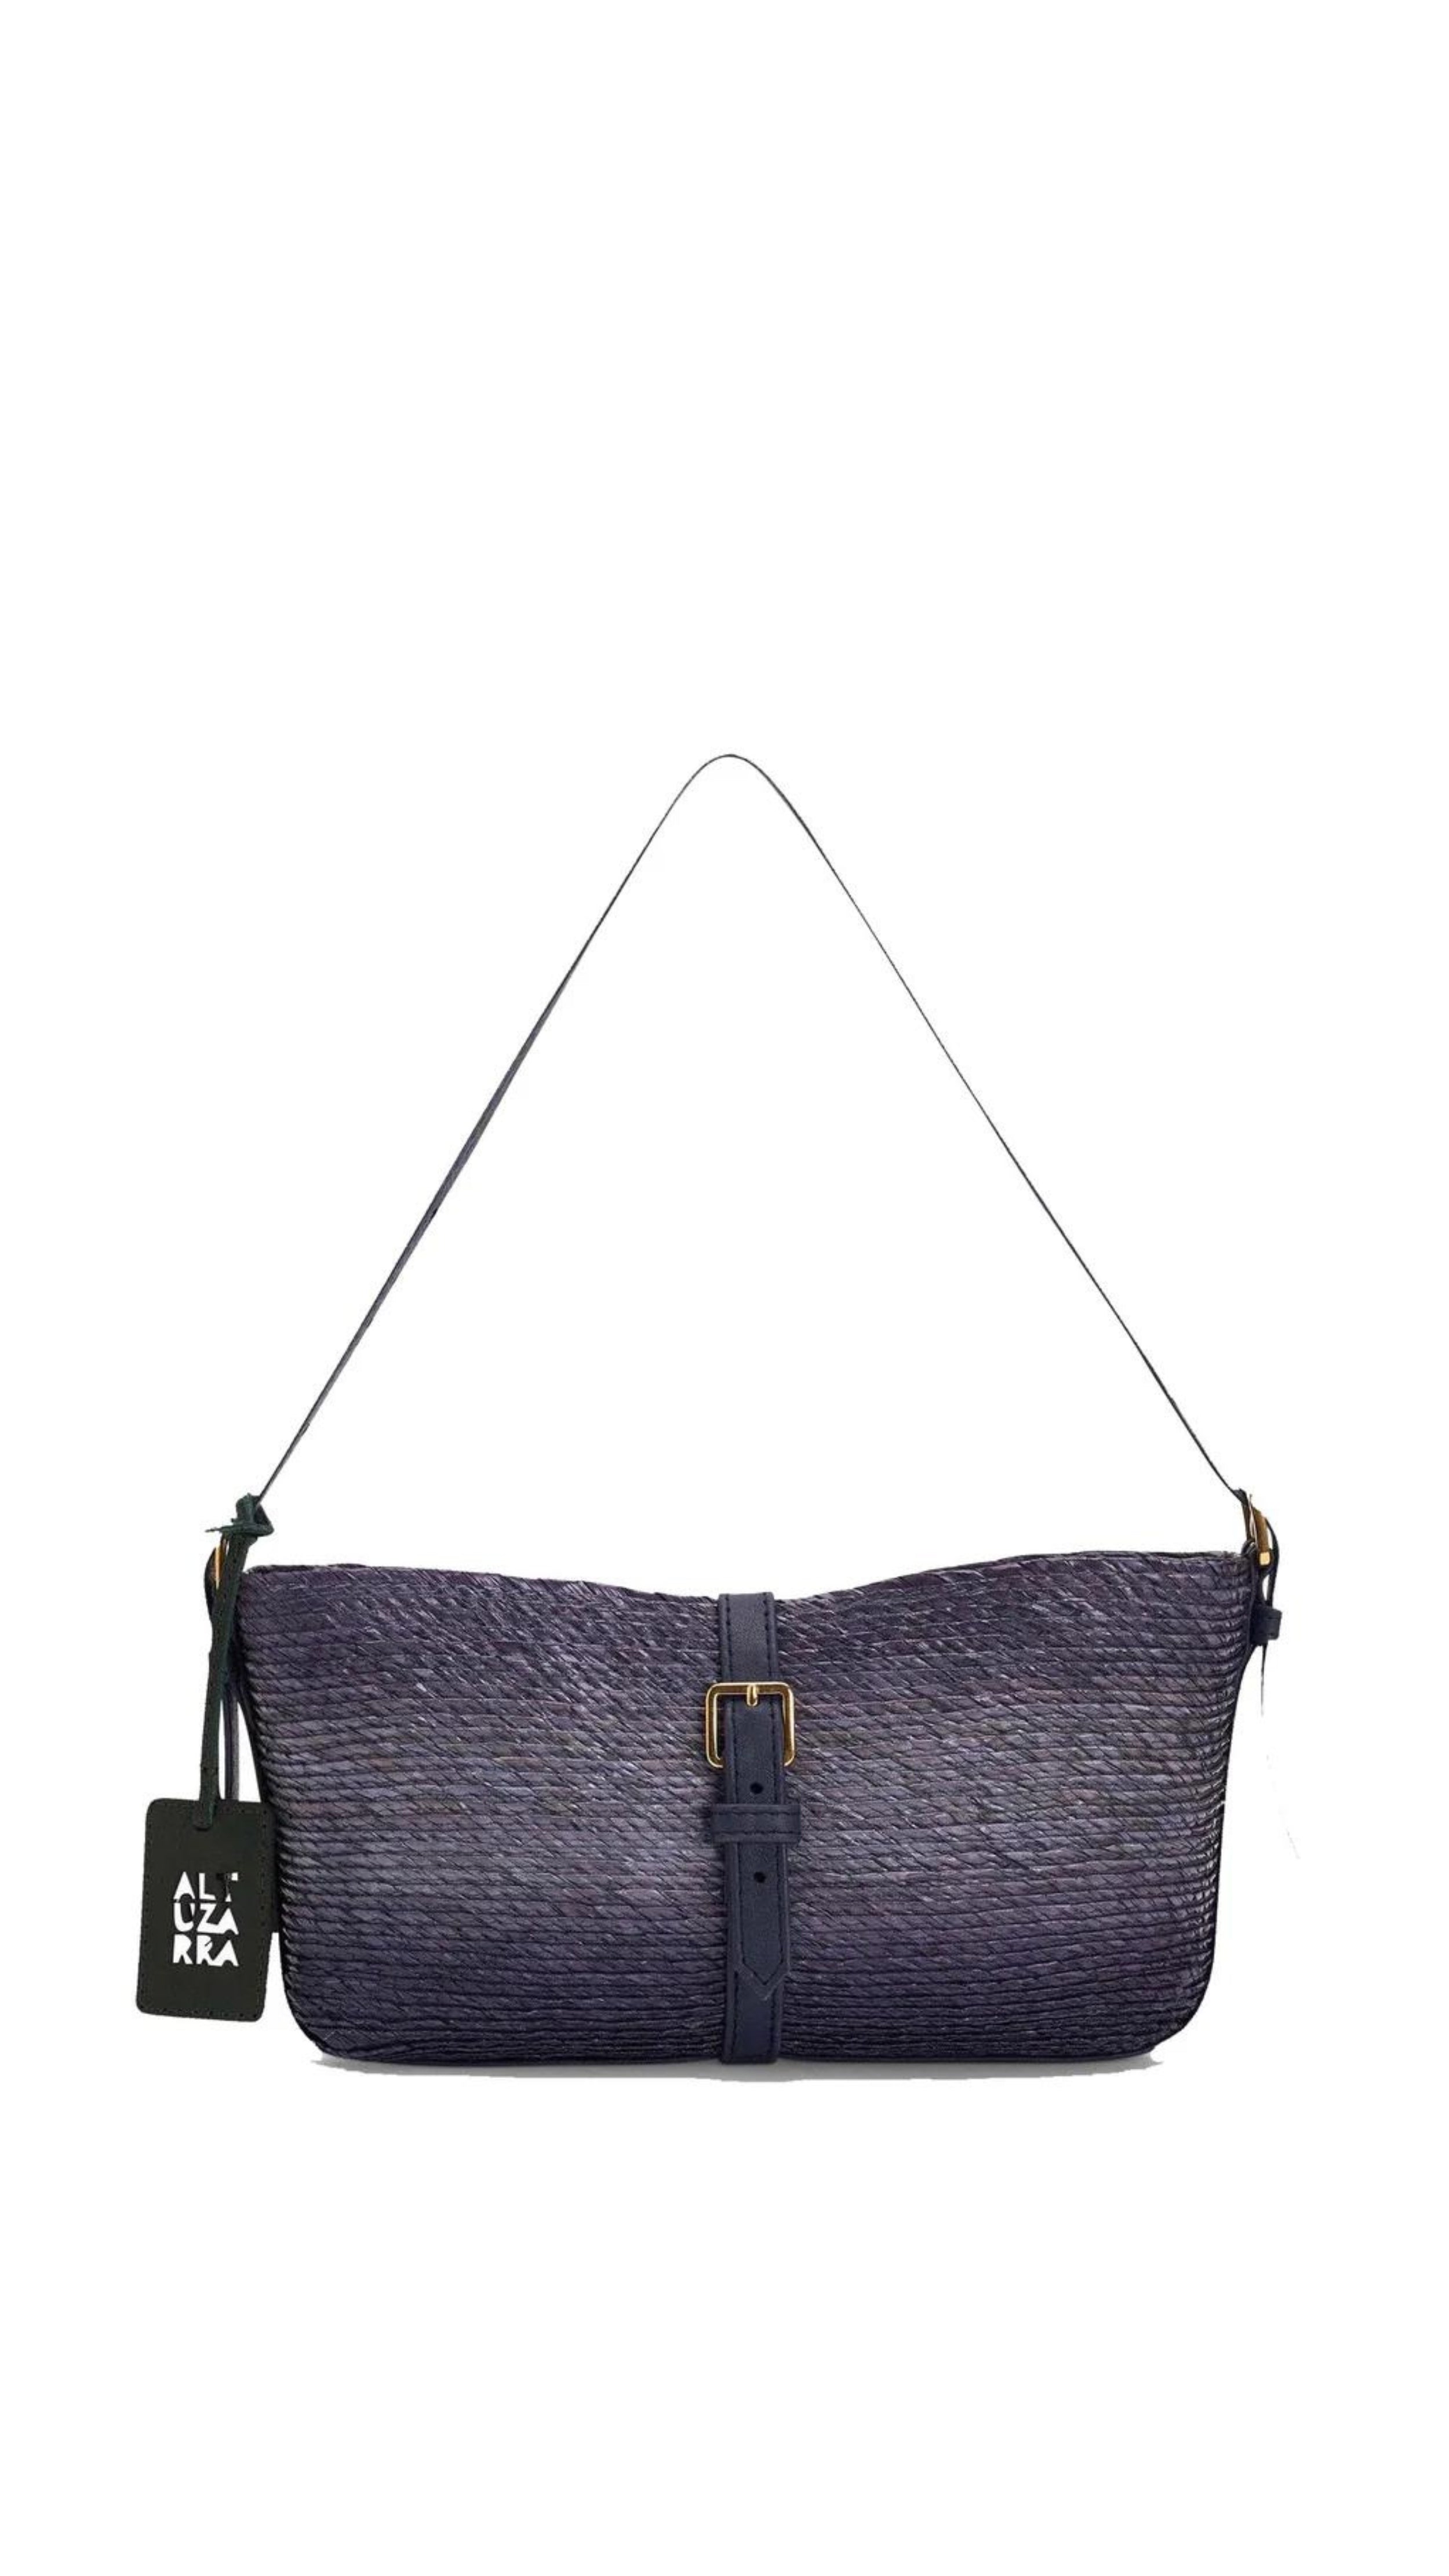 Altruzarra WATERMILL SHOULDER BAG in Murex. Raffia summer purse in deep blue tones and navy blue leather detailing and gold hardware. Adjustable strap for shoulder or long length. Shown from the front side. Available at Experience 27 Madrid Spain.